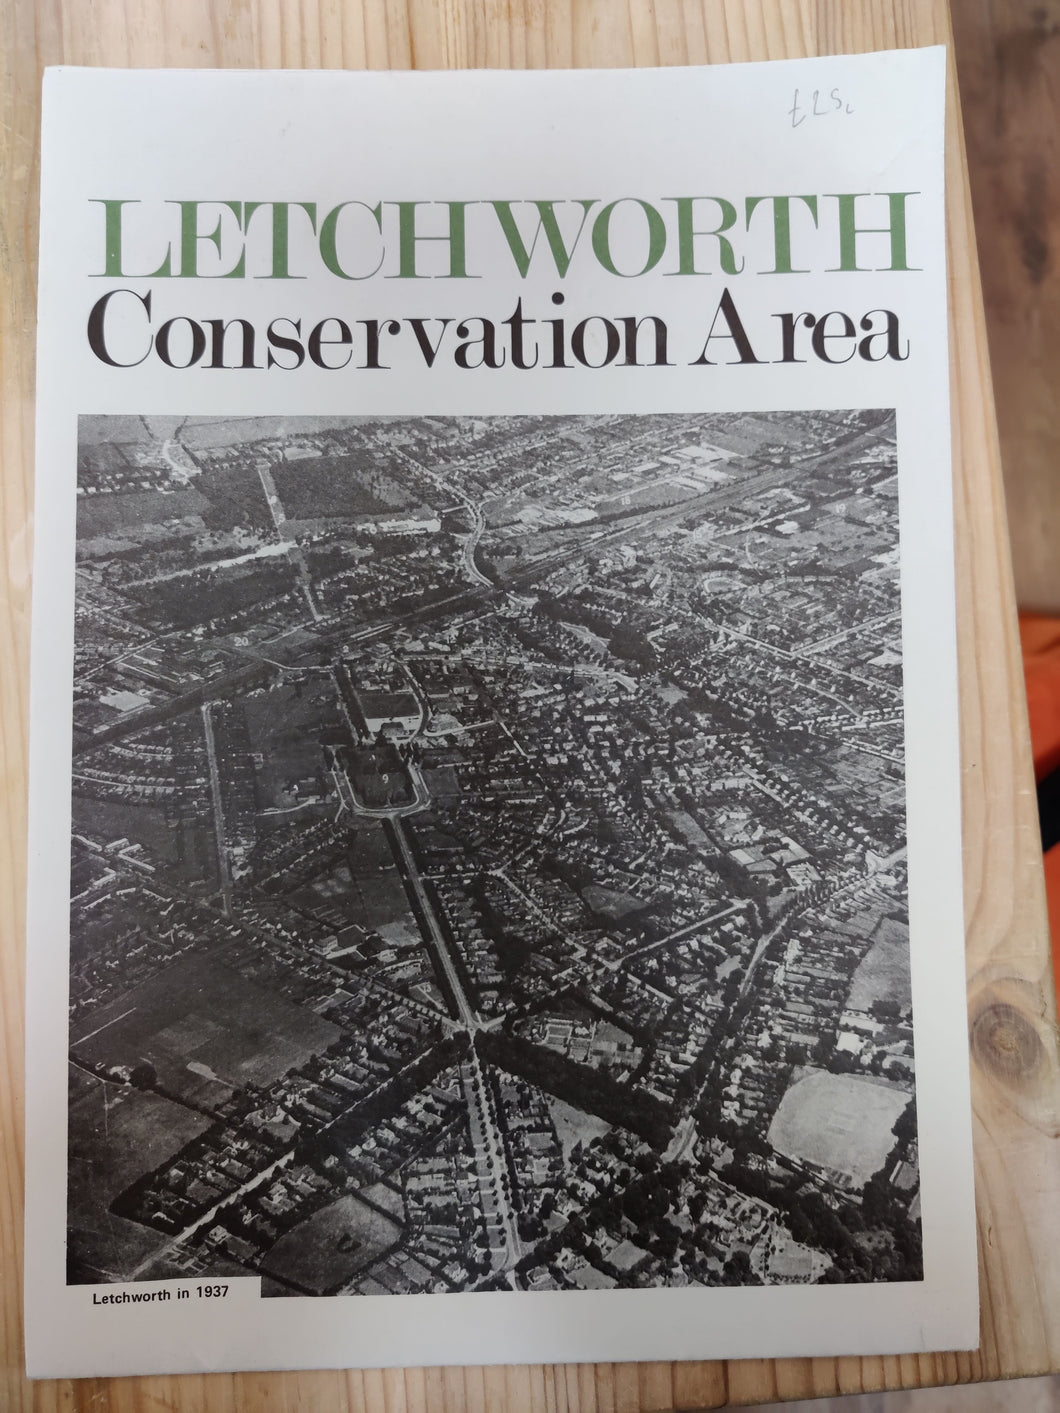 Letchworth Conservation Area